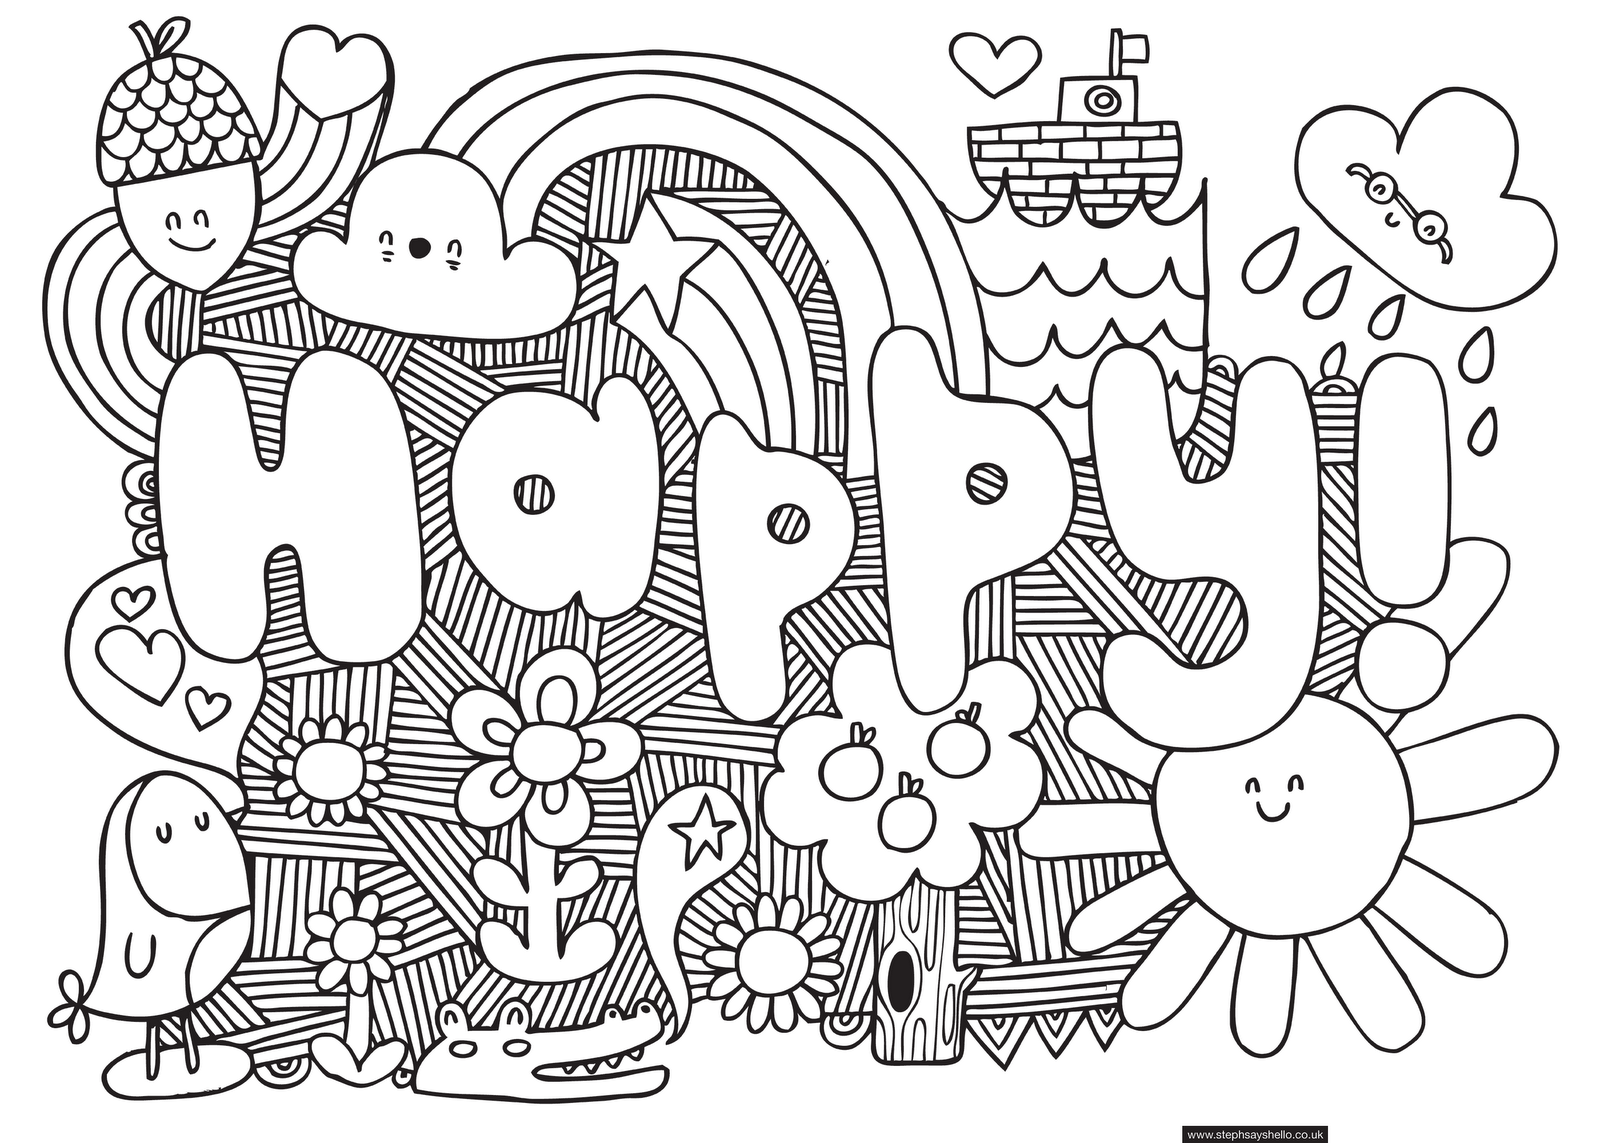 Download Cool Coloring Pages Elementary Kids - Coloring Home